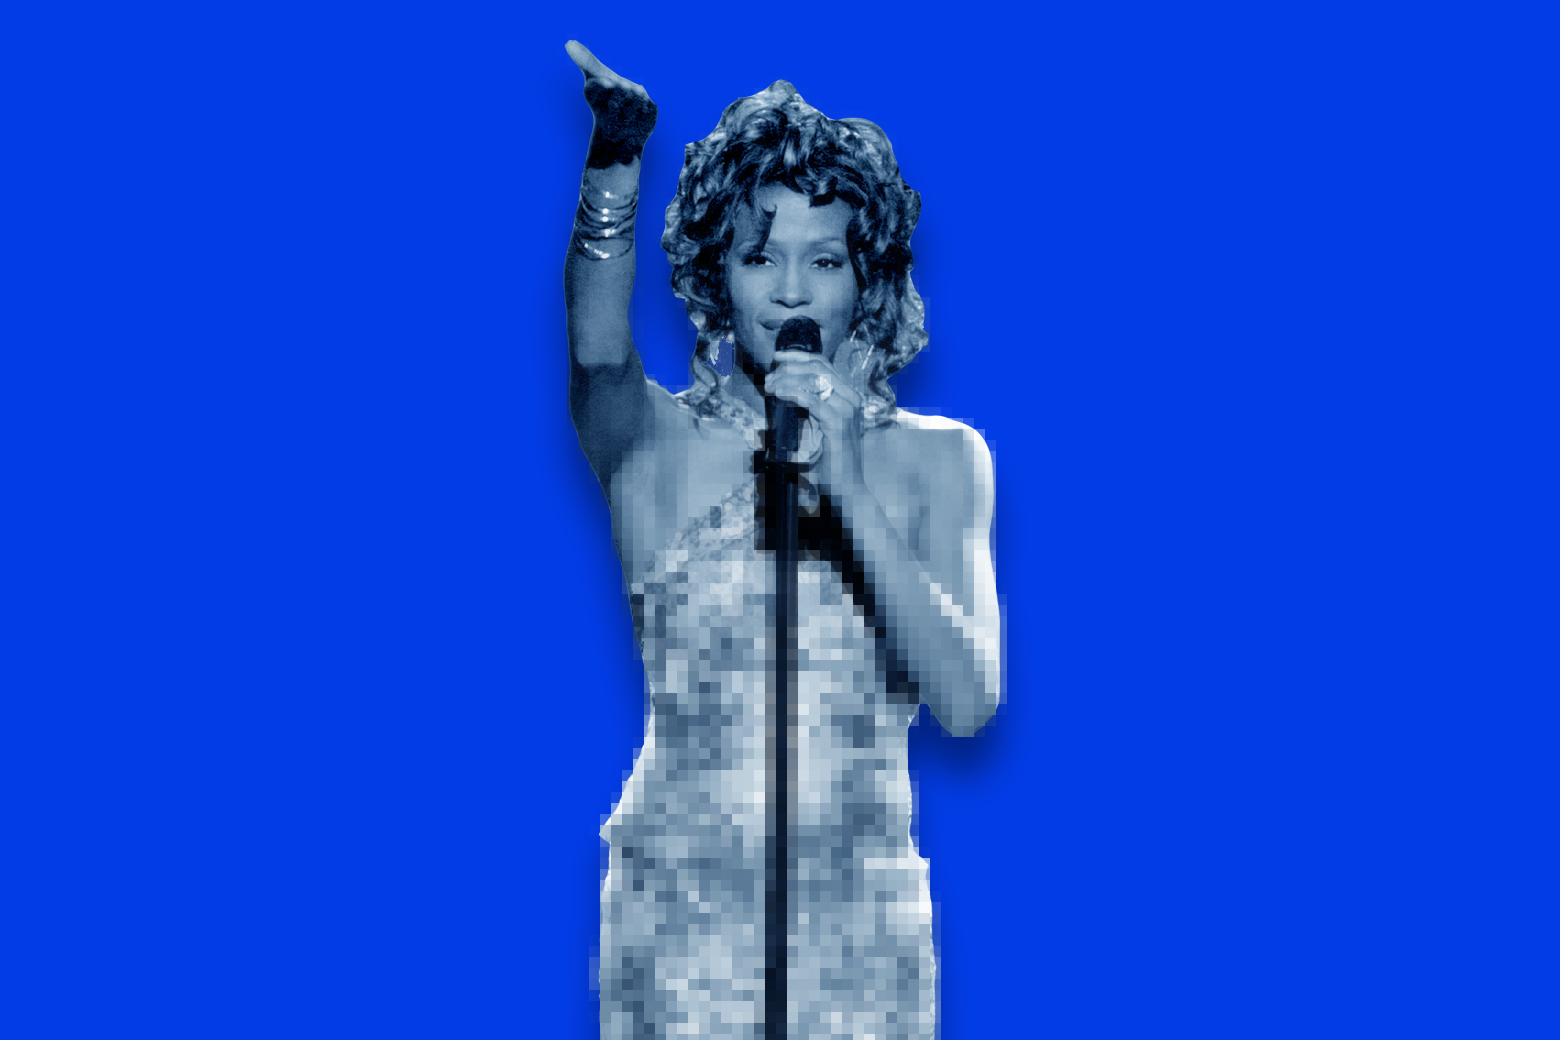 A depiction of Whitney Houston as a hologram.